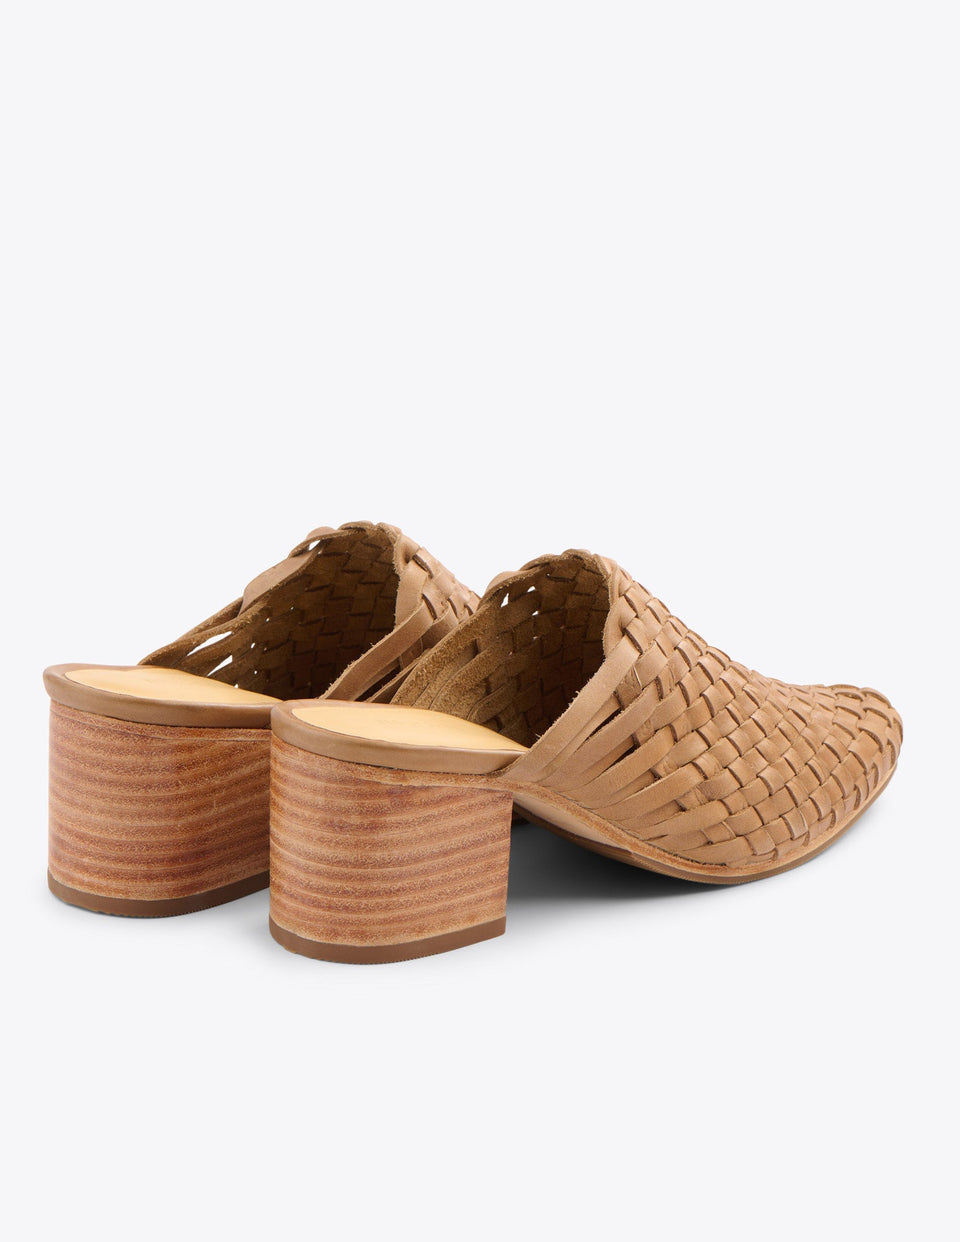 All-Day Woven Heeled Mule - Almond